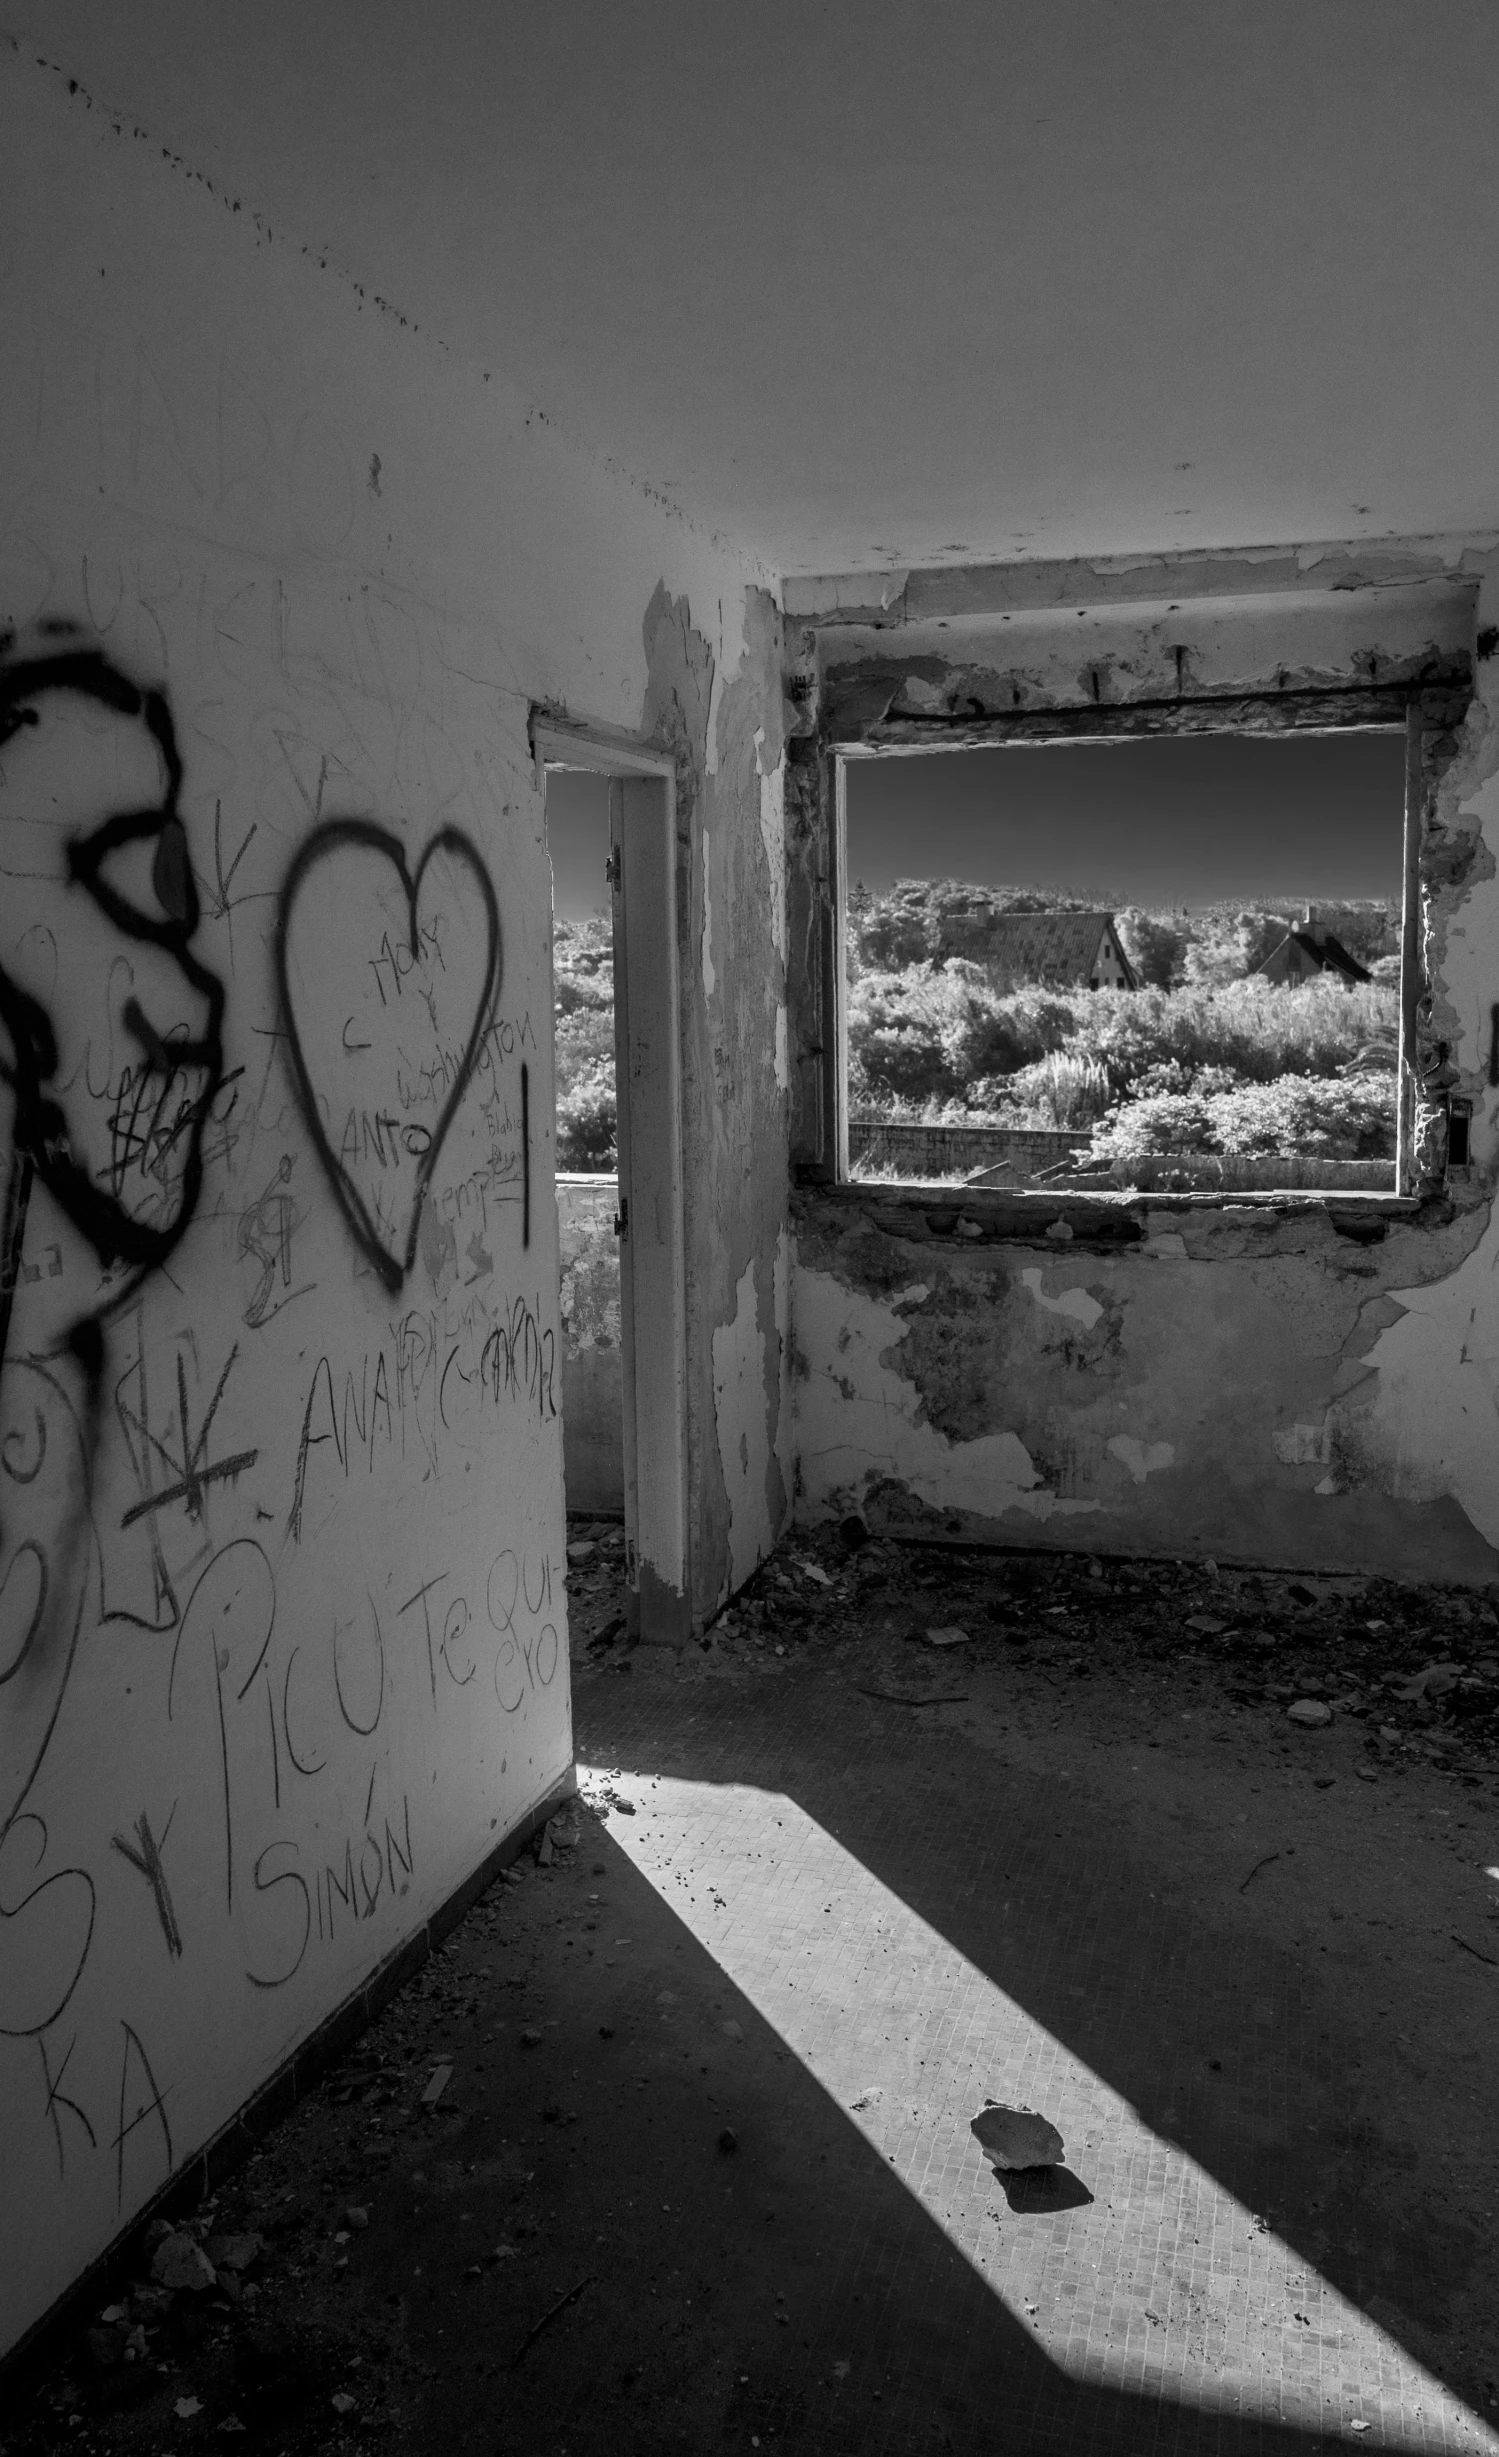 a dark, abandoned and open door leads into an area with graffiti